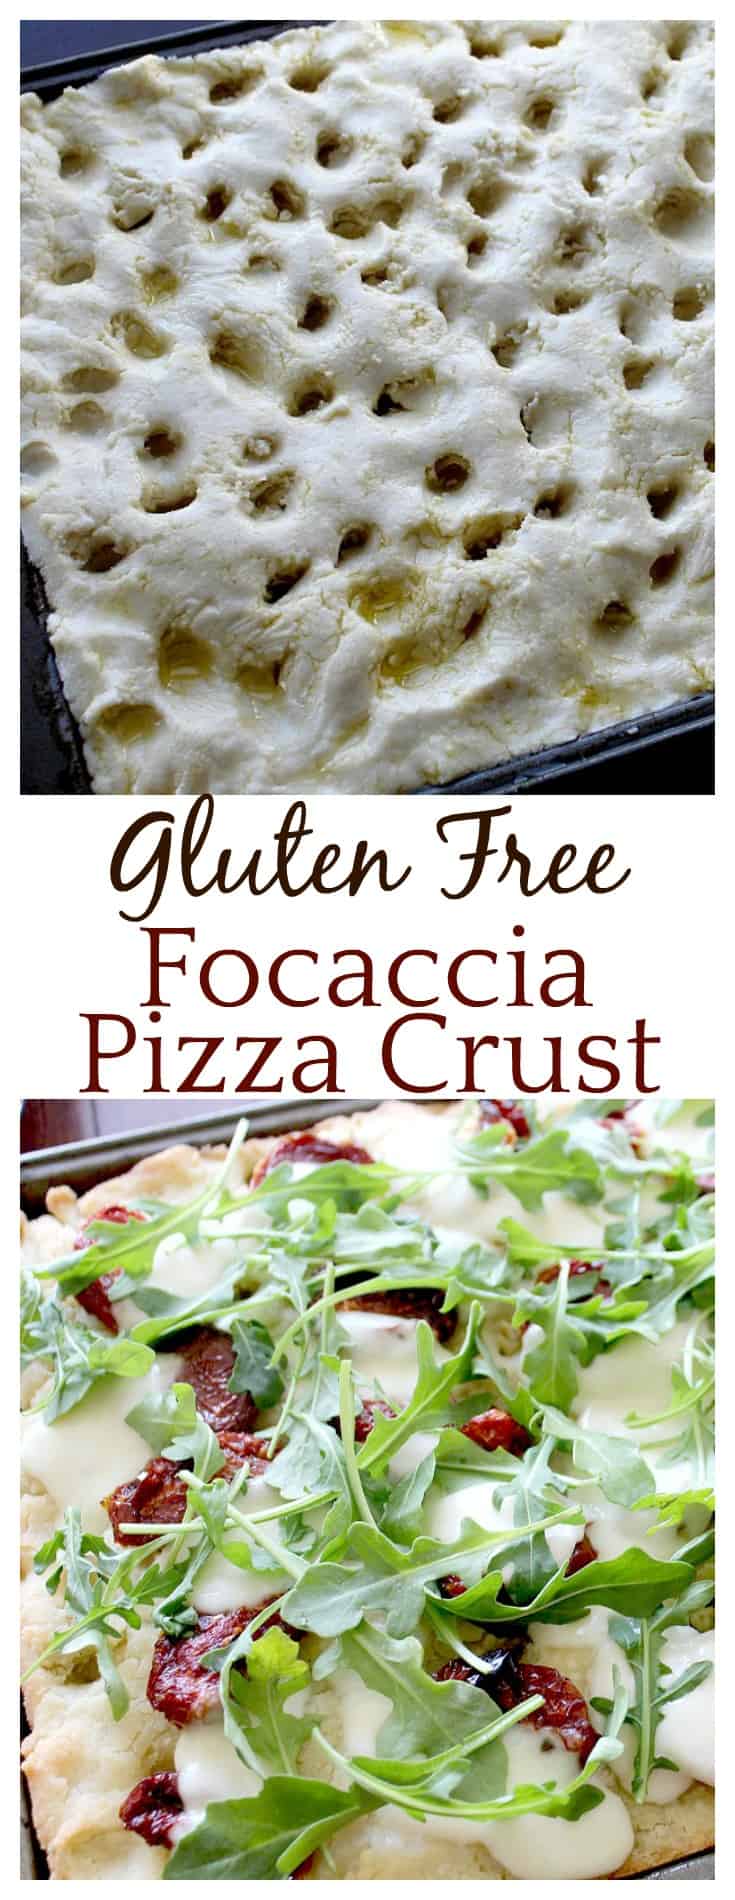 This gluten free focaccia pizza crust tasted just like the regular version (just a tad grainier from the gluten free flour!) - everyone loved it! 